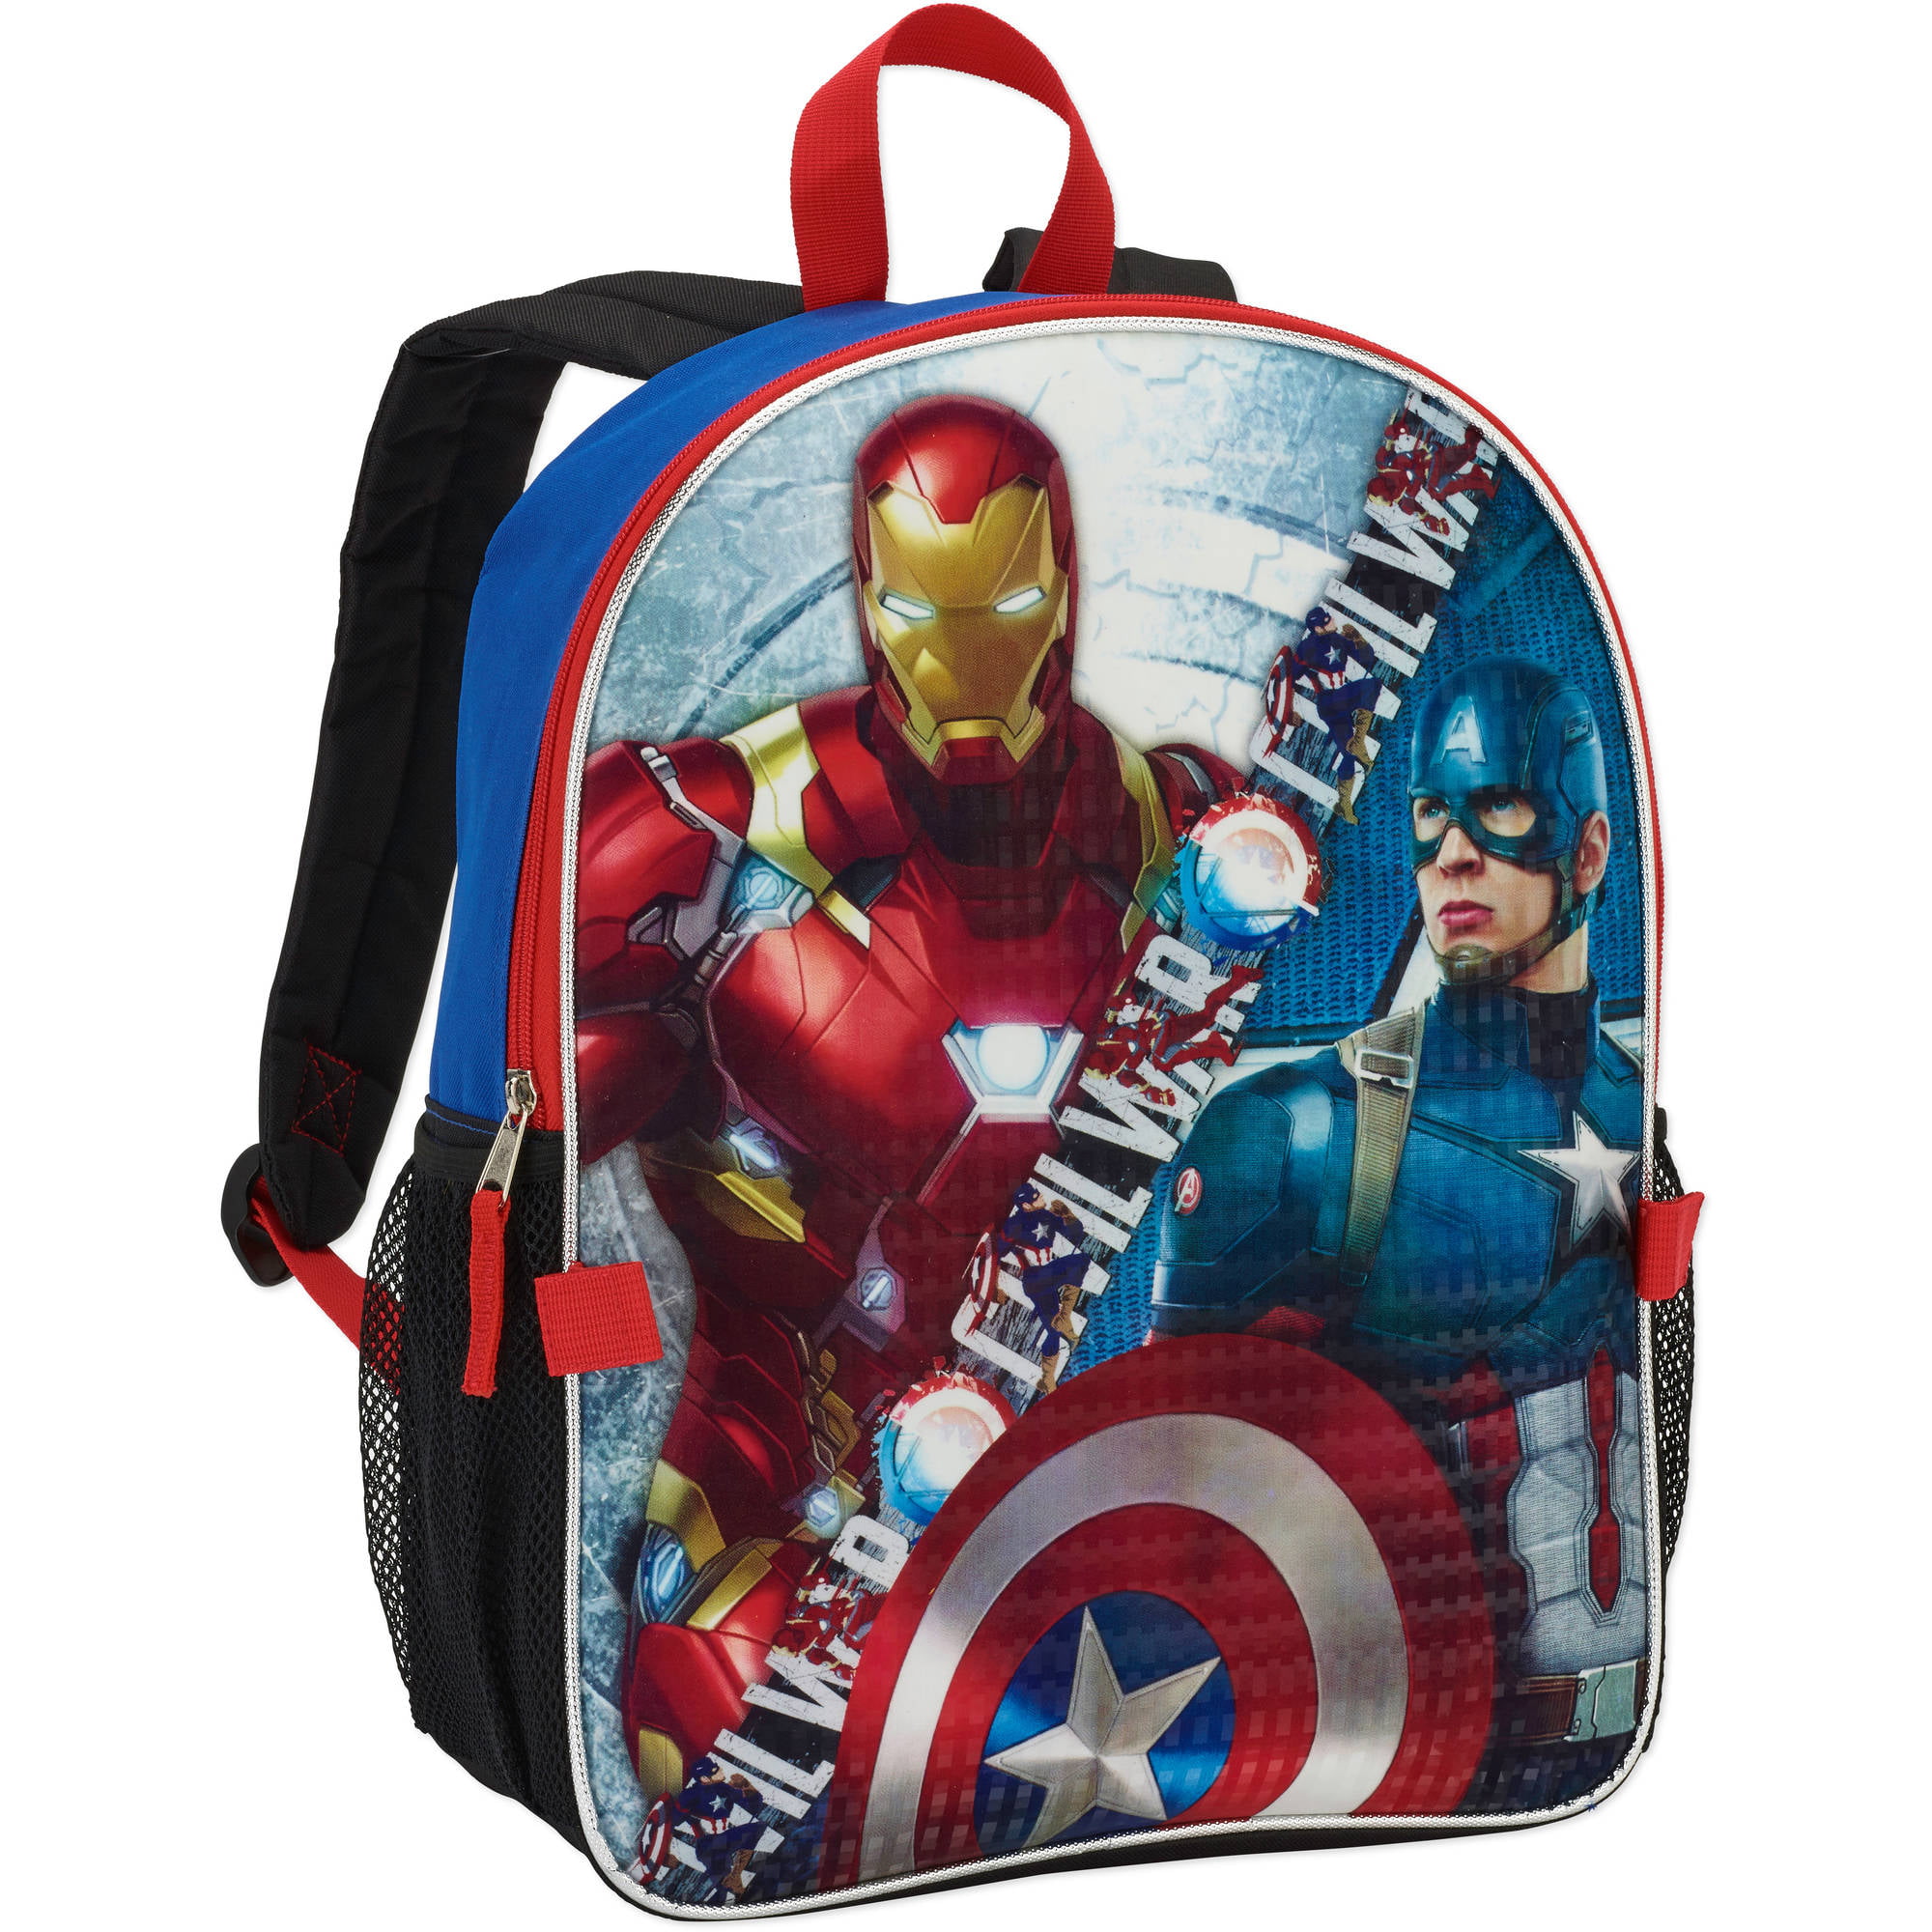 Marvel Captain America vs Ironman 16" School Backpack with Detachable Lunch Box 